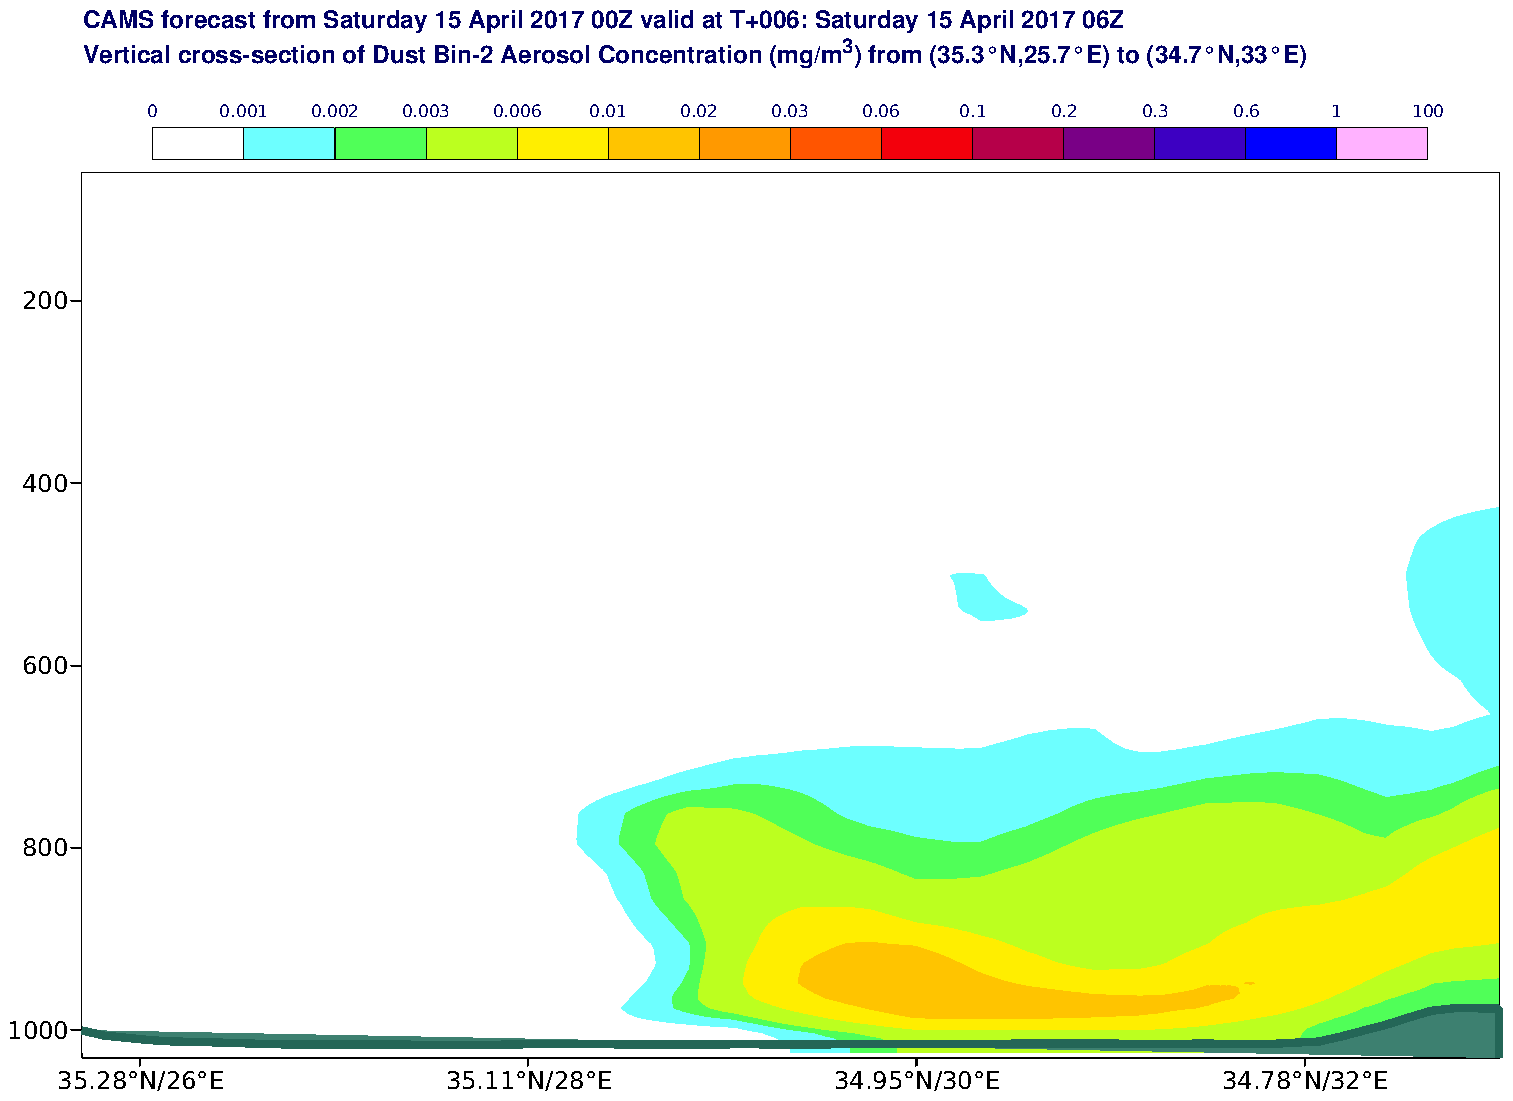 Vertical cross-section of Dust Bin-2 Aerosol Concentration (mg/m3) valid at T6 - 2017-04-15 06:00